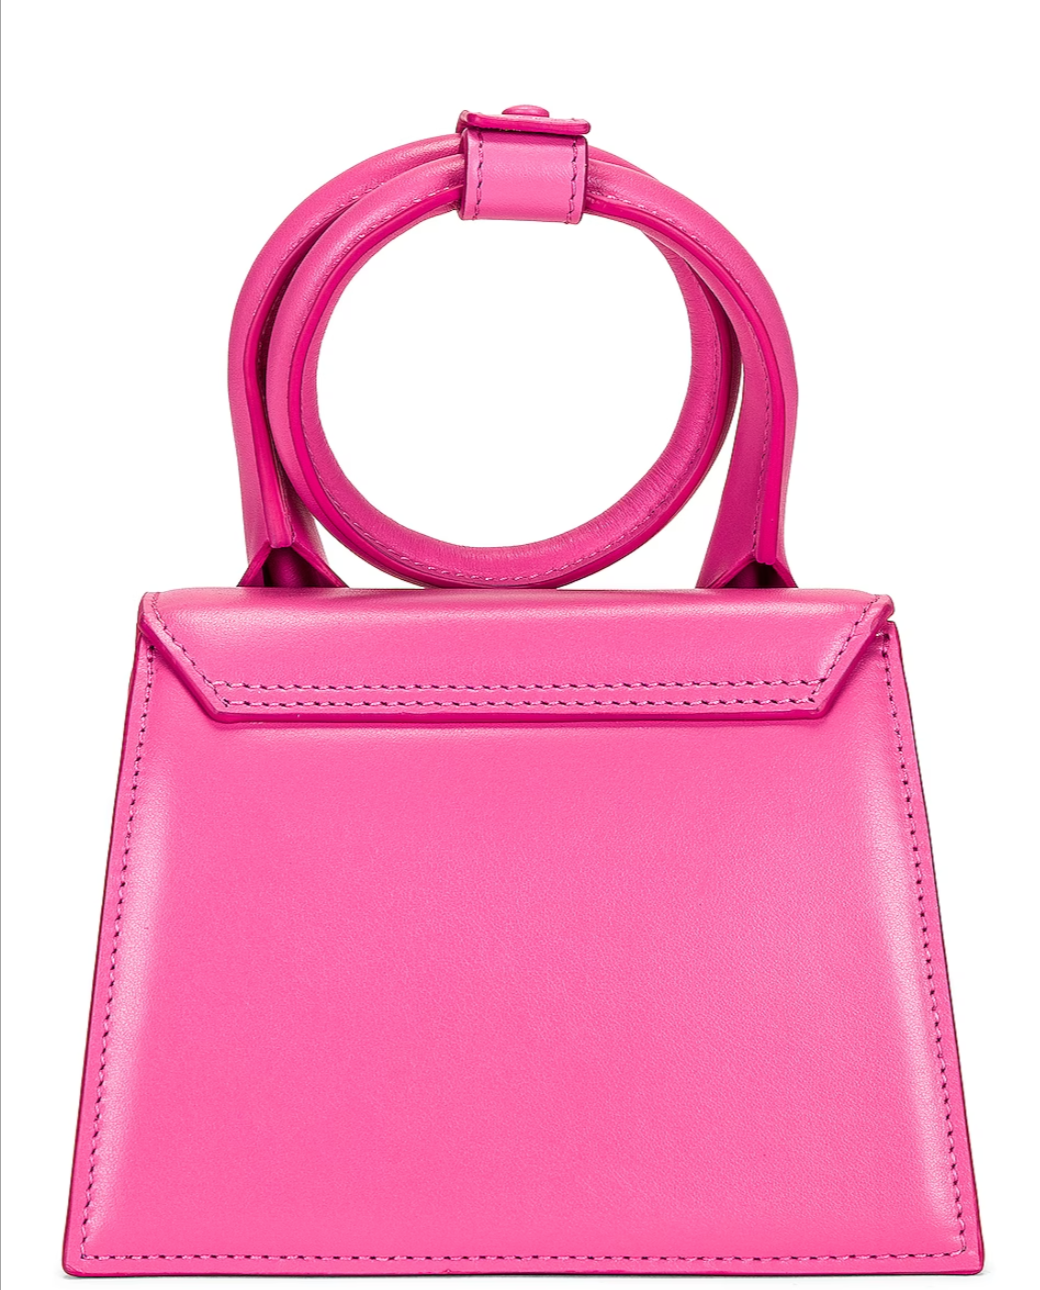 Jacquemus Le Chiquito Noeud Bag in Pink